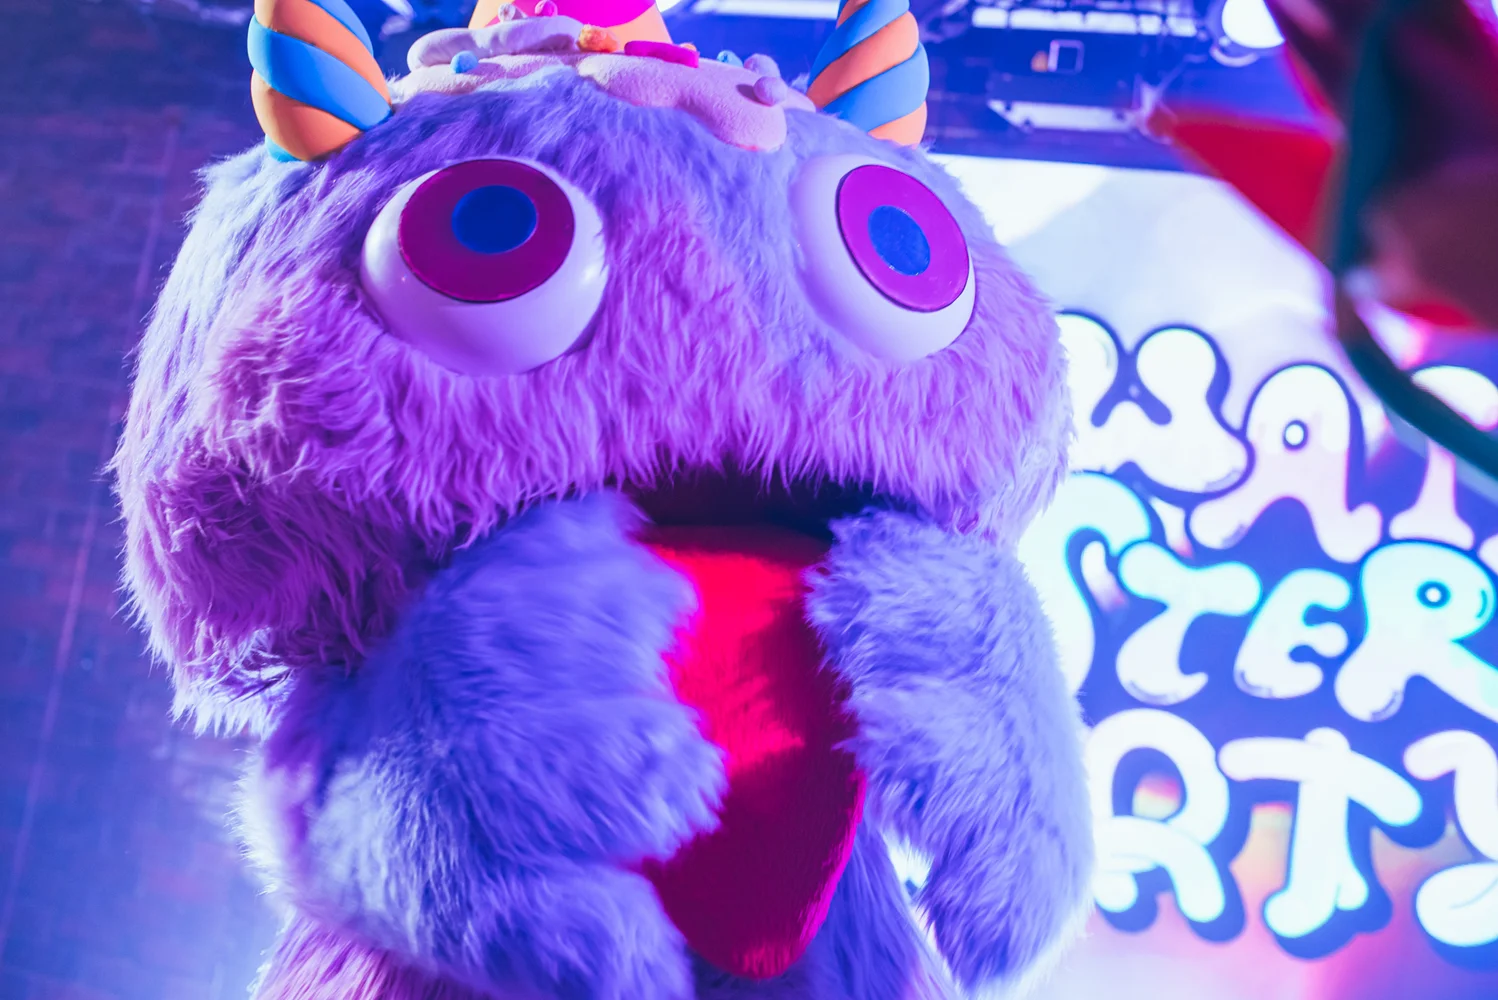 Kawaii Monster Party Feb 23, 2023 | 10% Off for Rakuten Employees vs Same-Day Tickets On-Site!